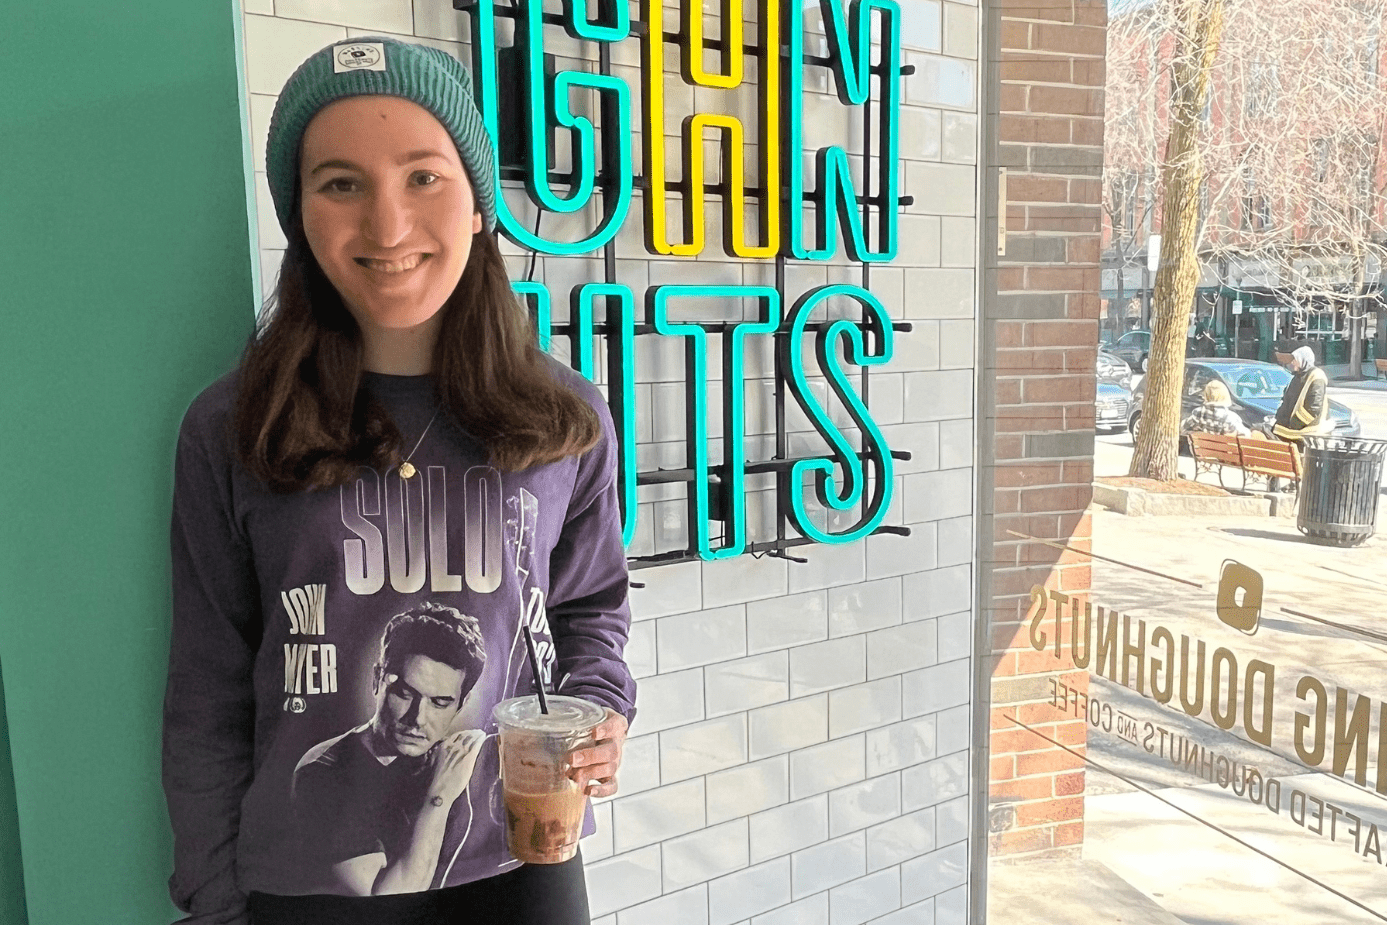 Local foodie and Skidmore student Sarah Libov ‘24 sheds some light on what your favorite Saratoga coffee shop might say about you.